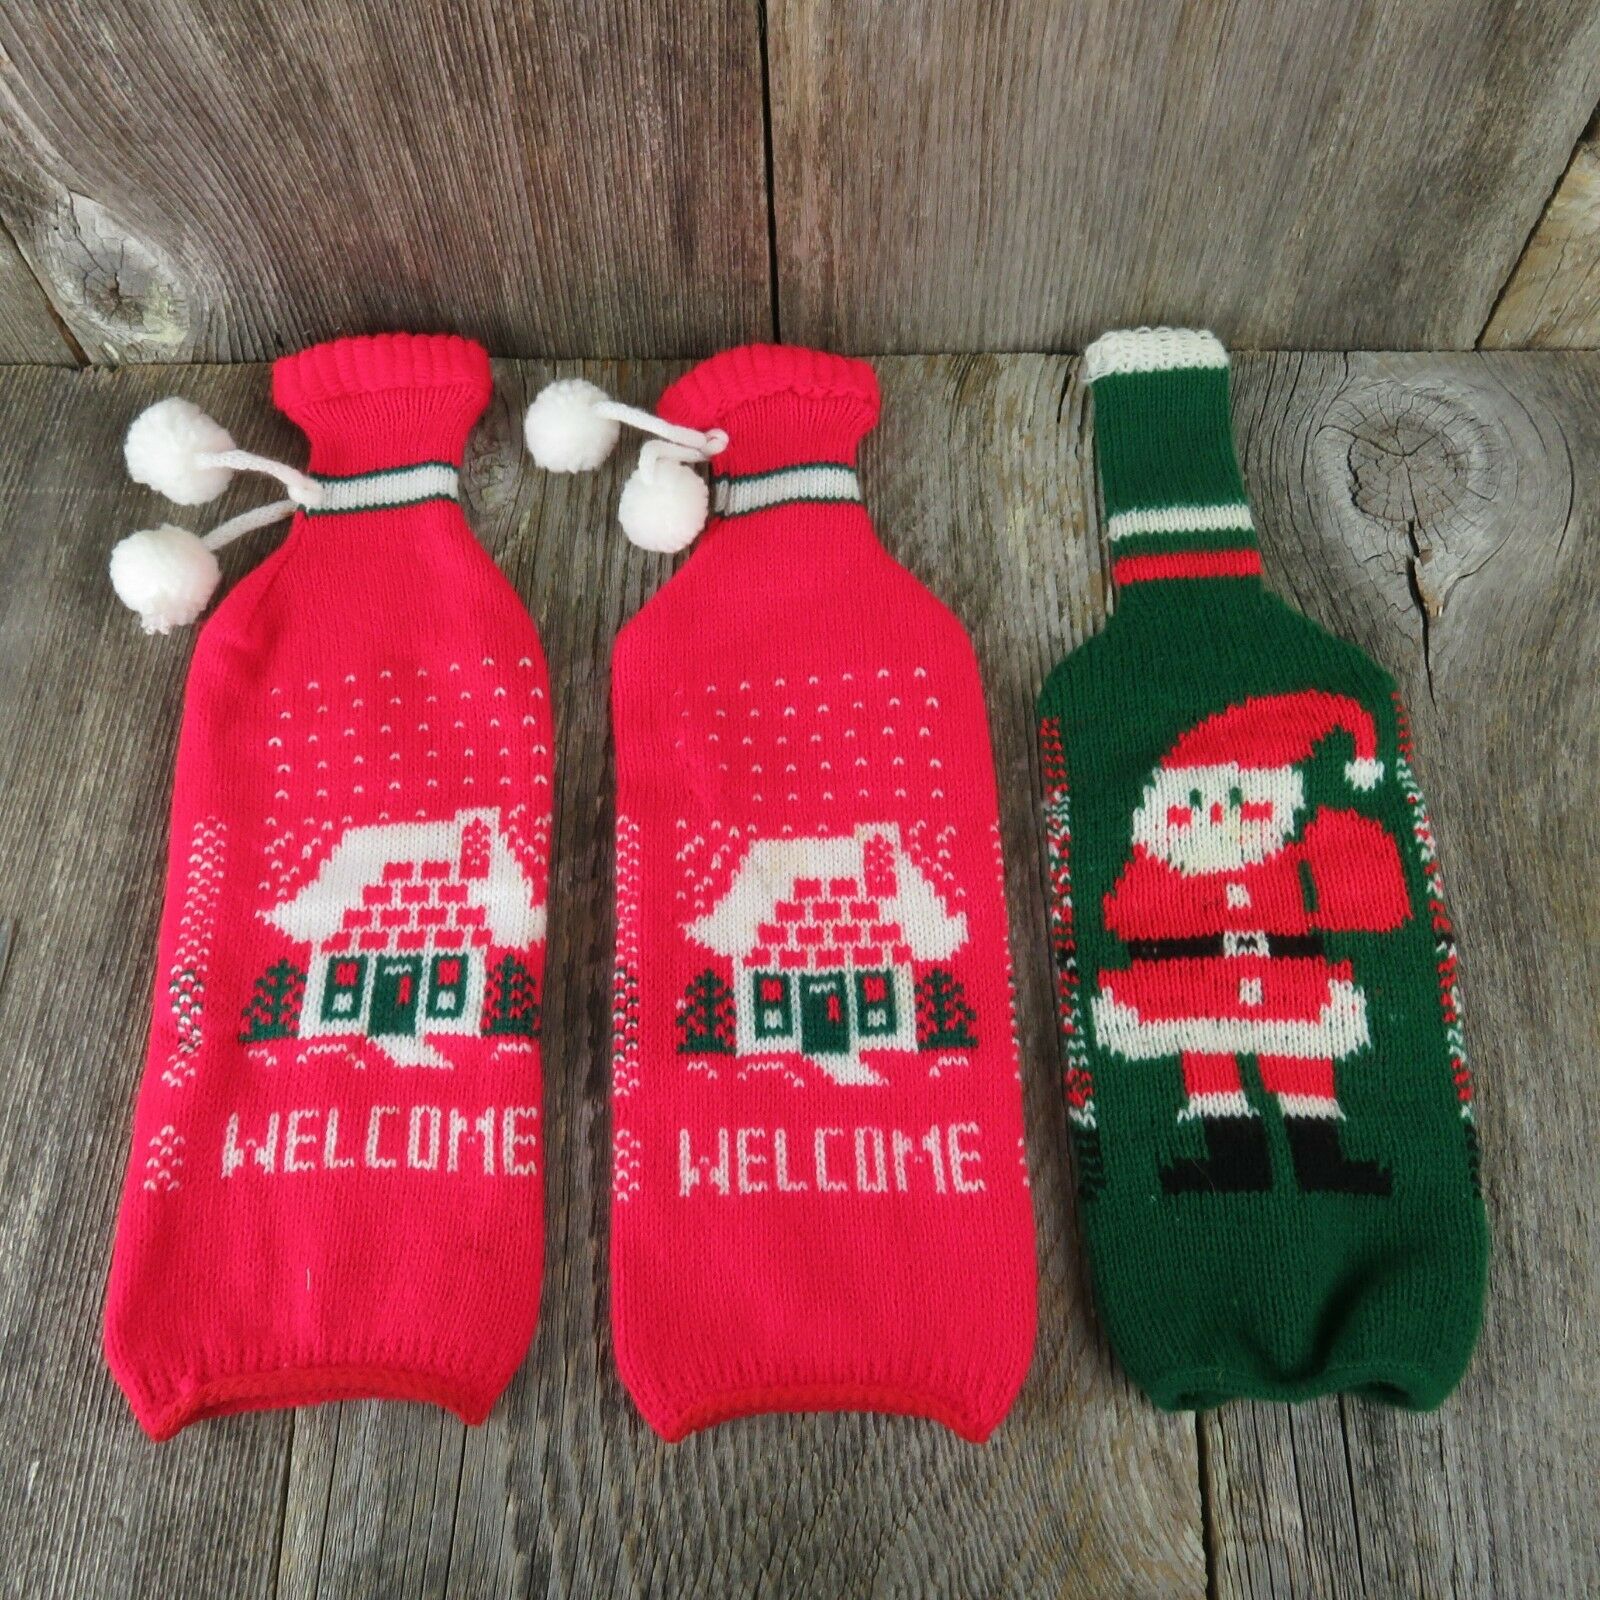 Vintage Christmas Stocking Bottle Covers Tote Red White Green Knitted Gift - At Grandma's Table